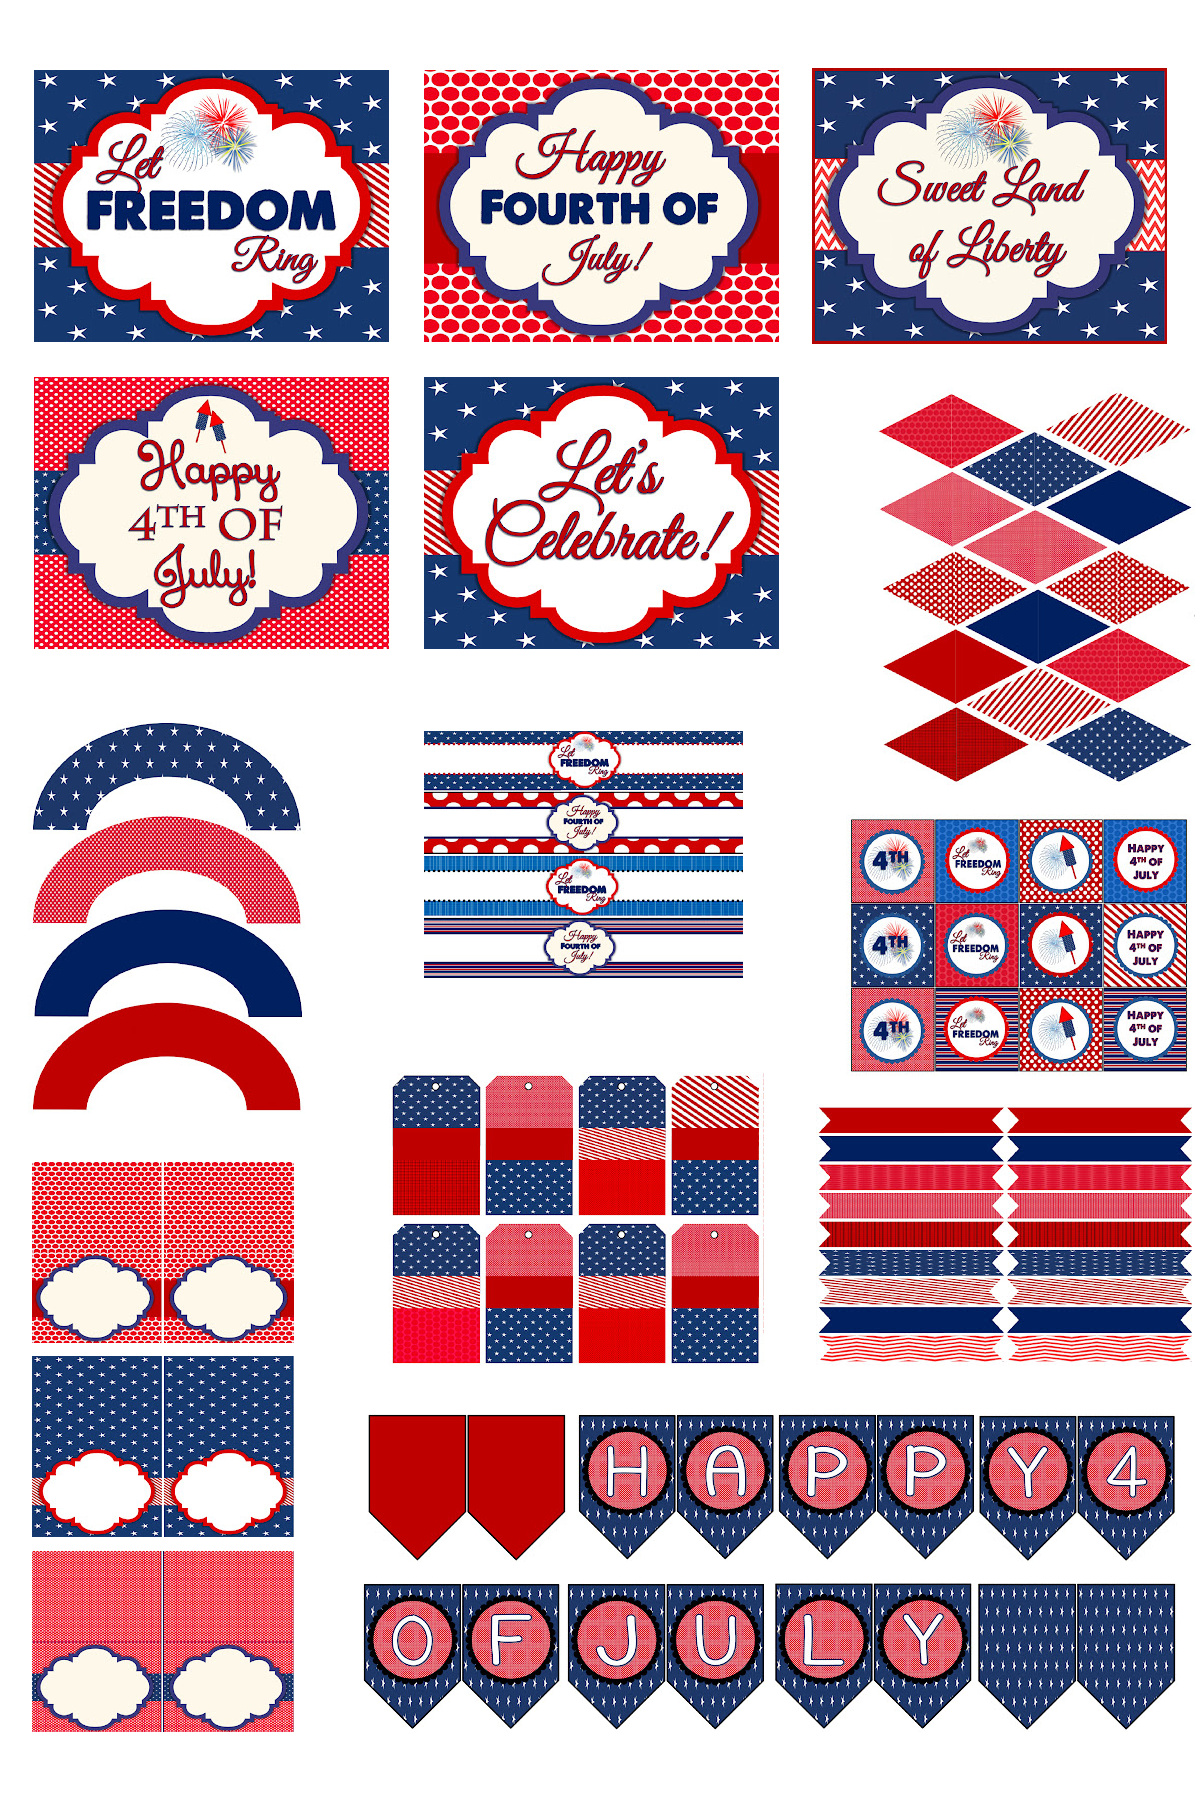 FREE Fun 4th of July Party Printables